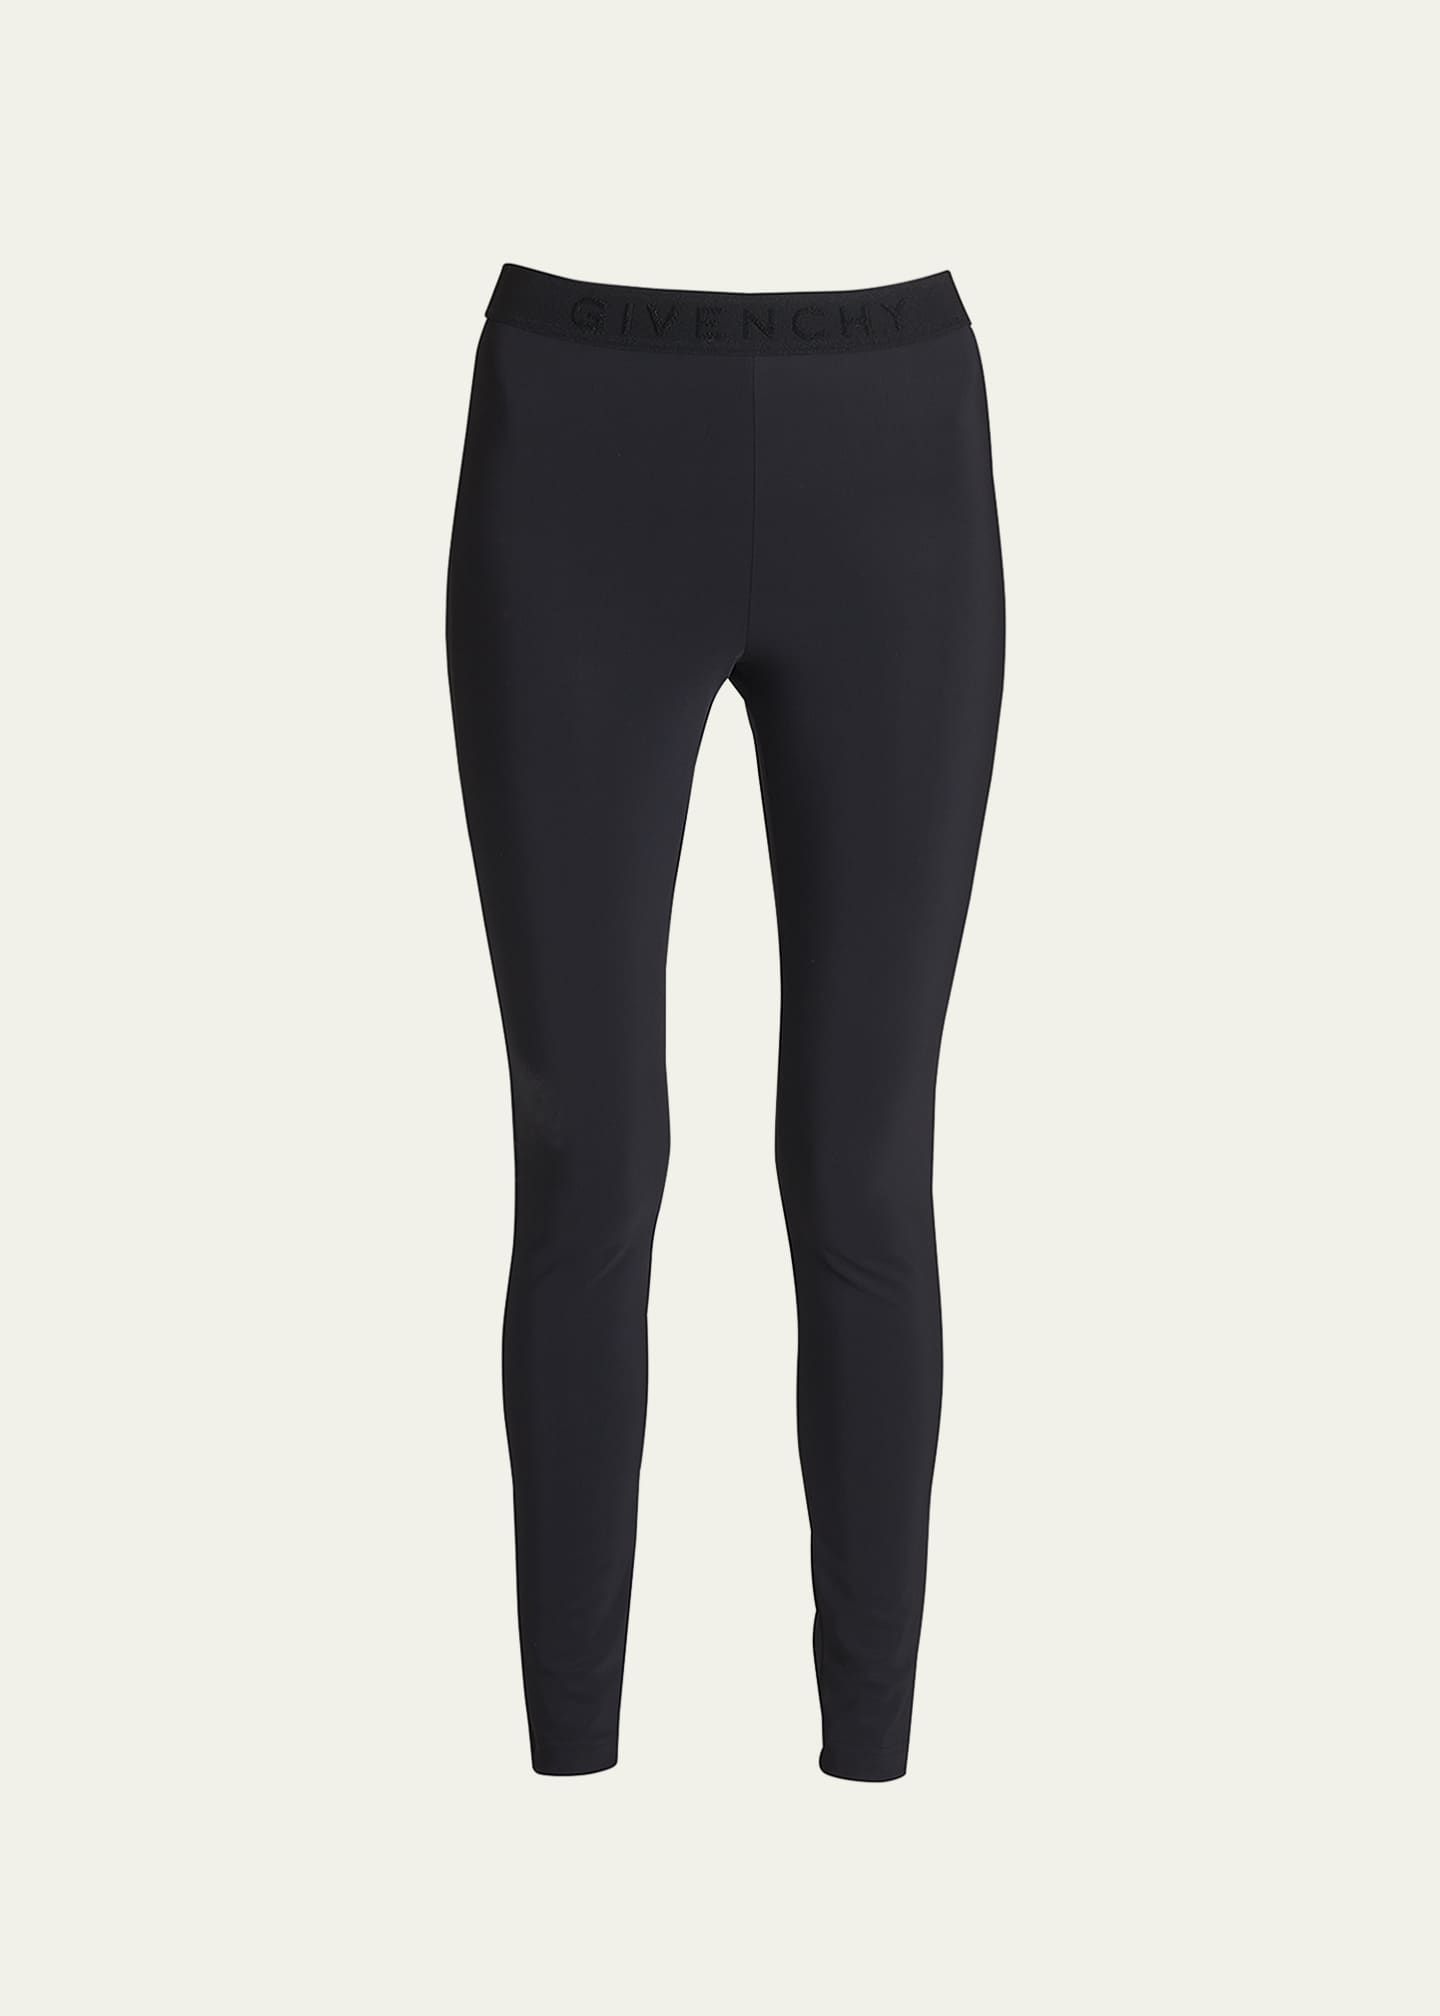 Buy Givenchy Black All-over Logo Print Tights in Cotton-blend for